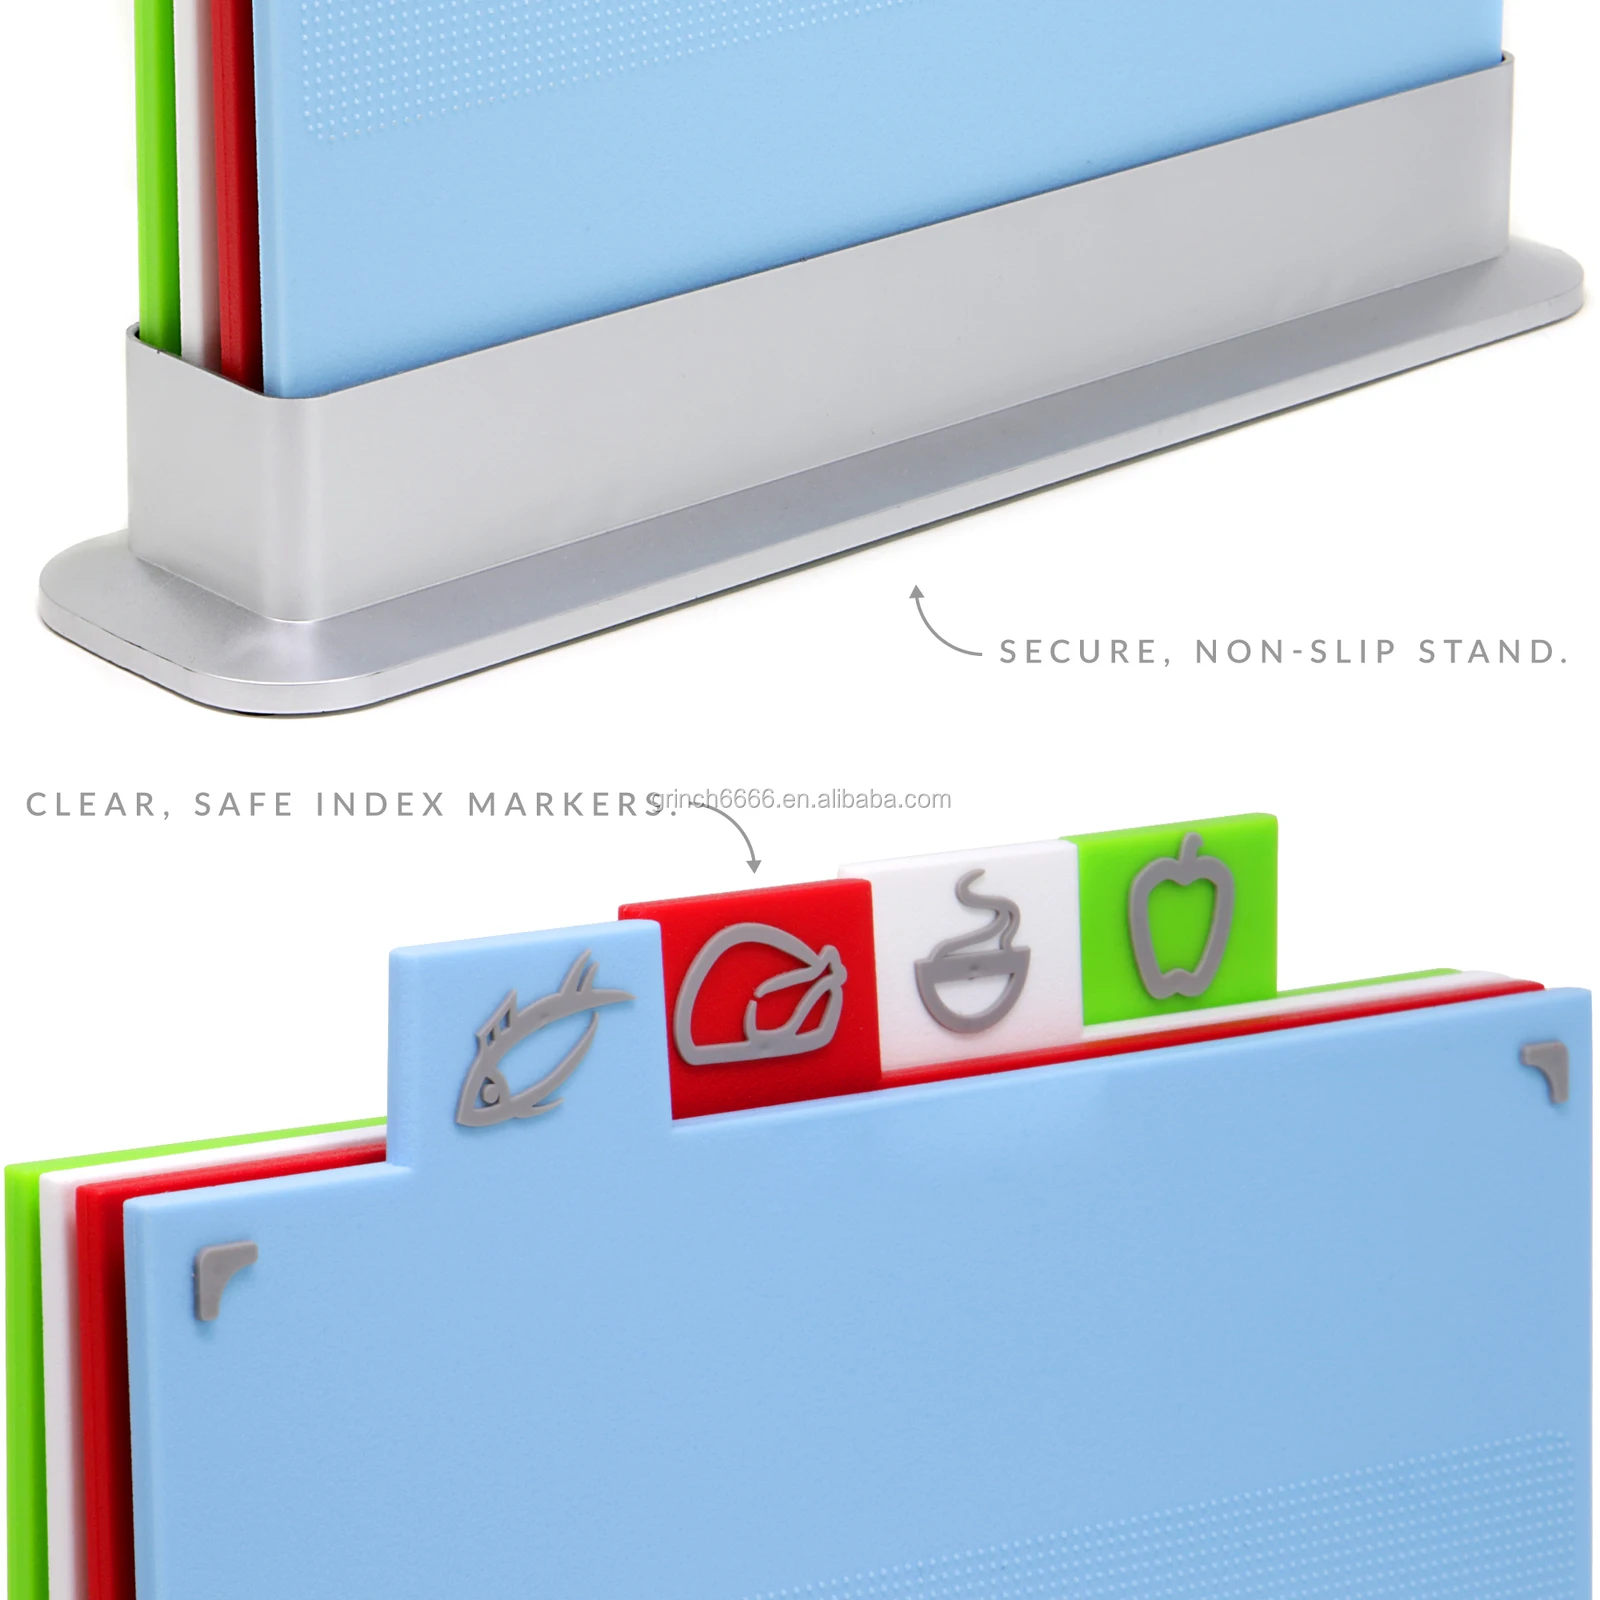 Details about   Coloured Cutting Boards Chopping Board Set Non-slip Index Cutting Boards Pad S 